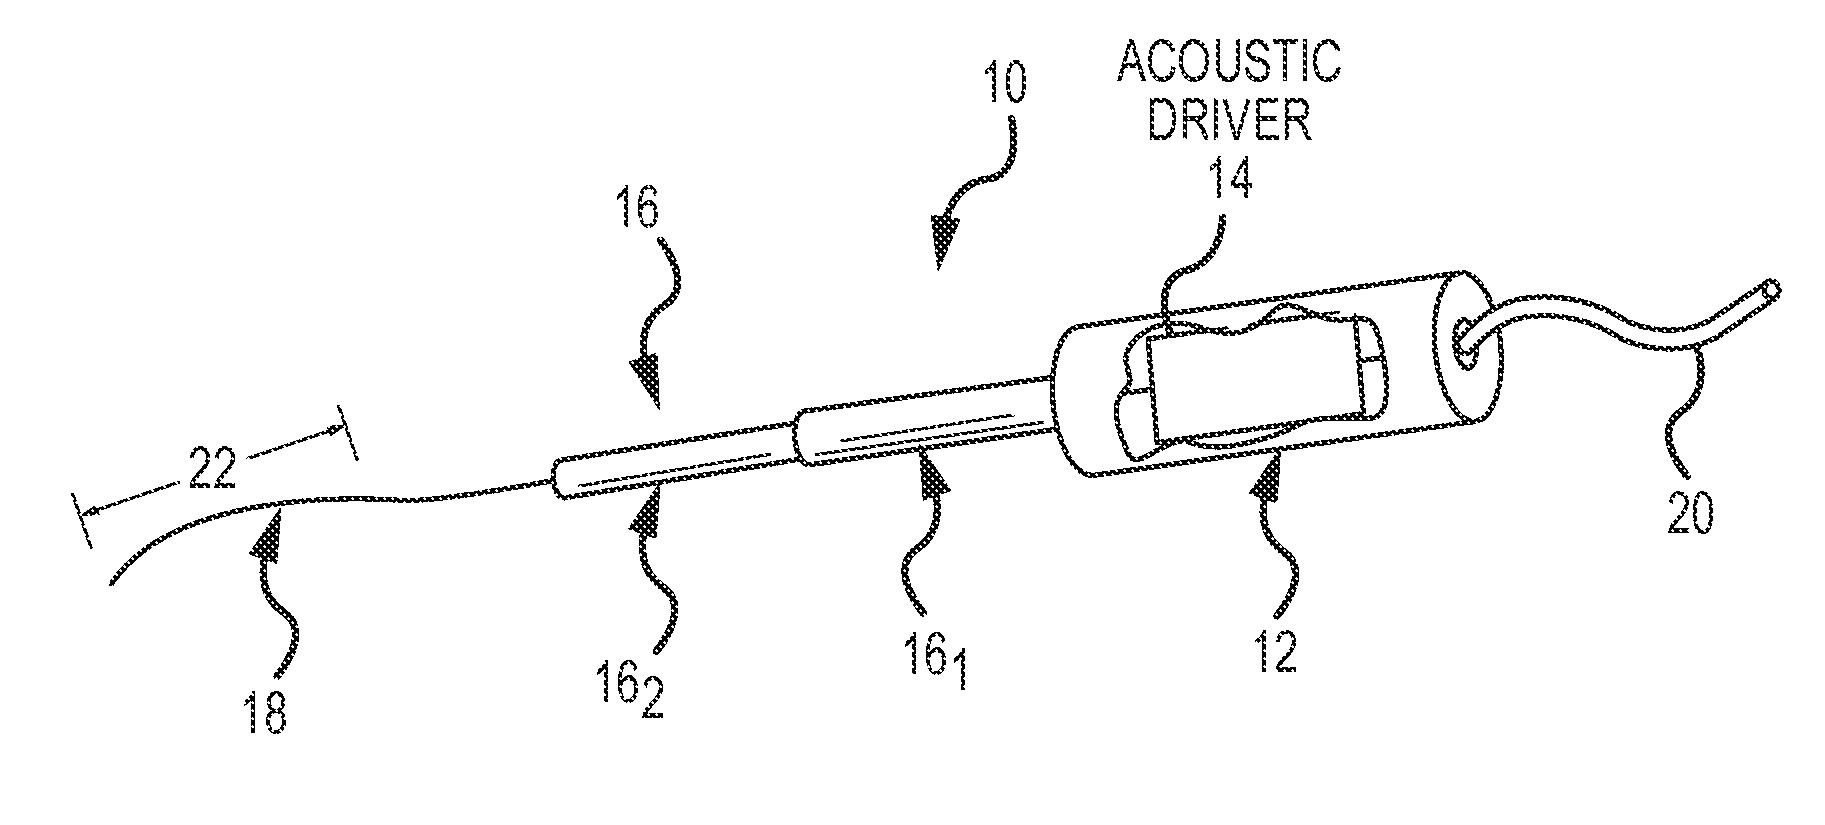 Ultrasonic endovascular clearing device